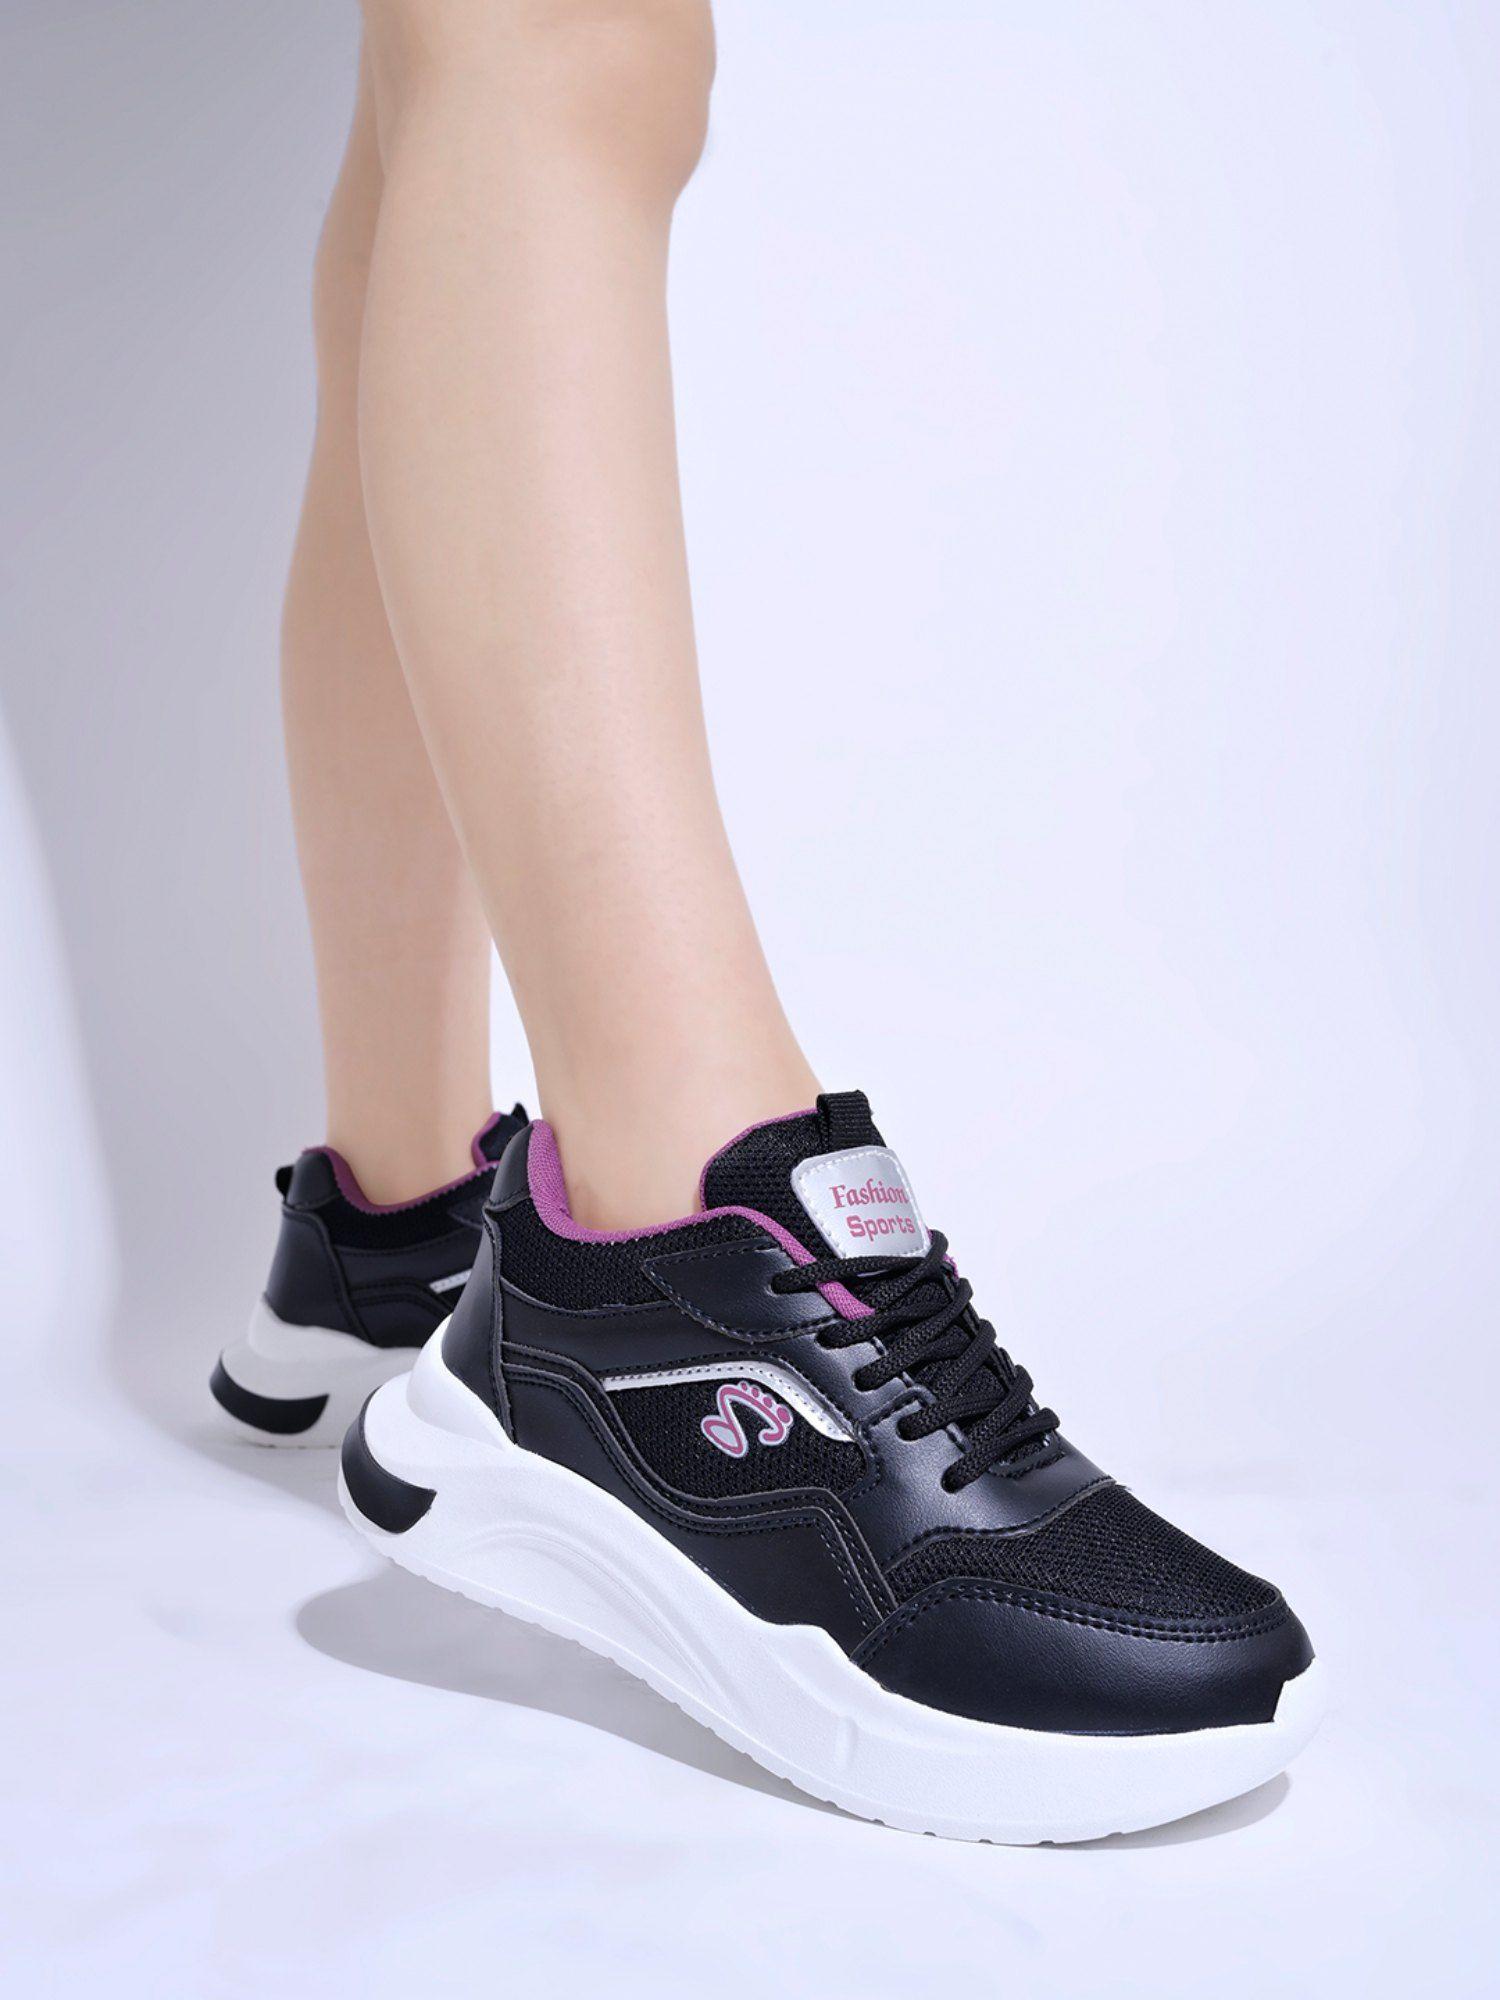 lace-up-comfortable-black-sports-shoes-for-girls